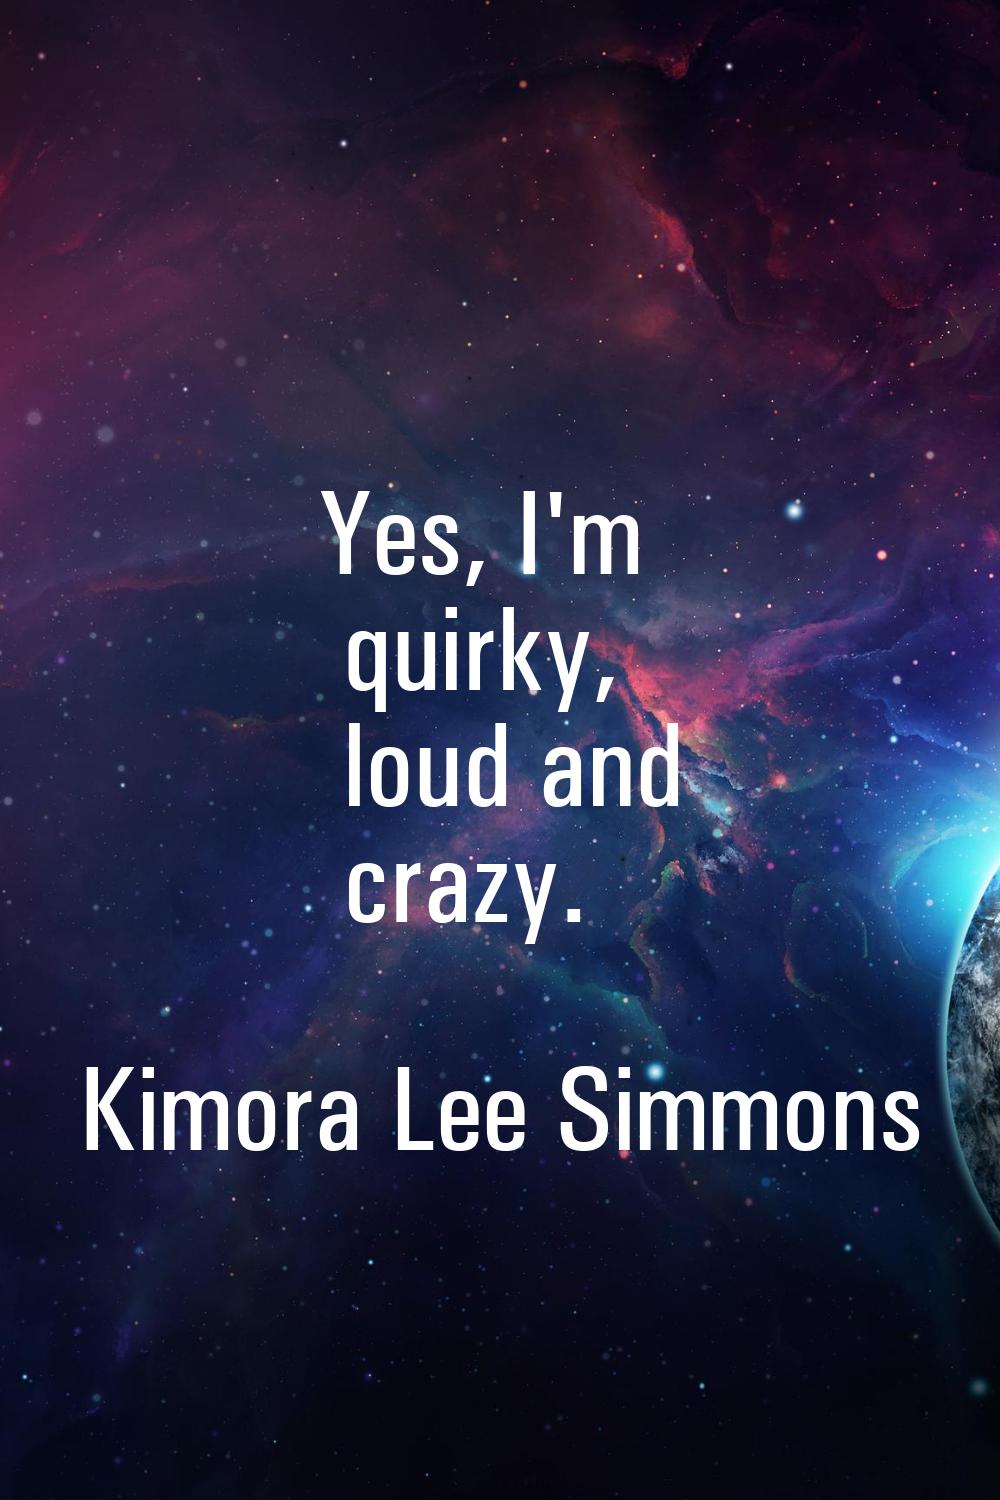 Yes, I'm quirky, loud and crazy.